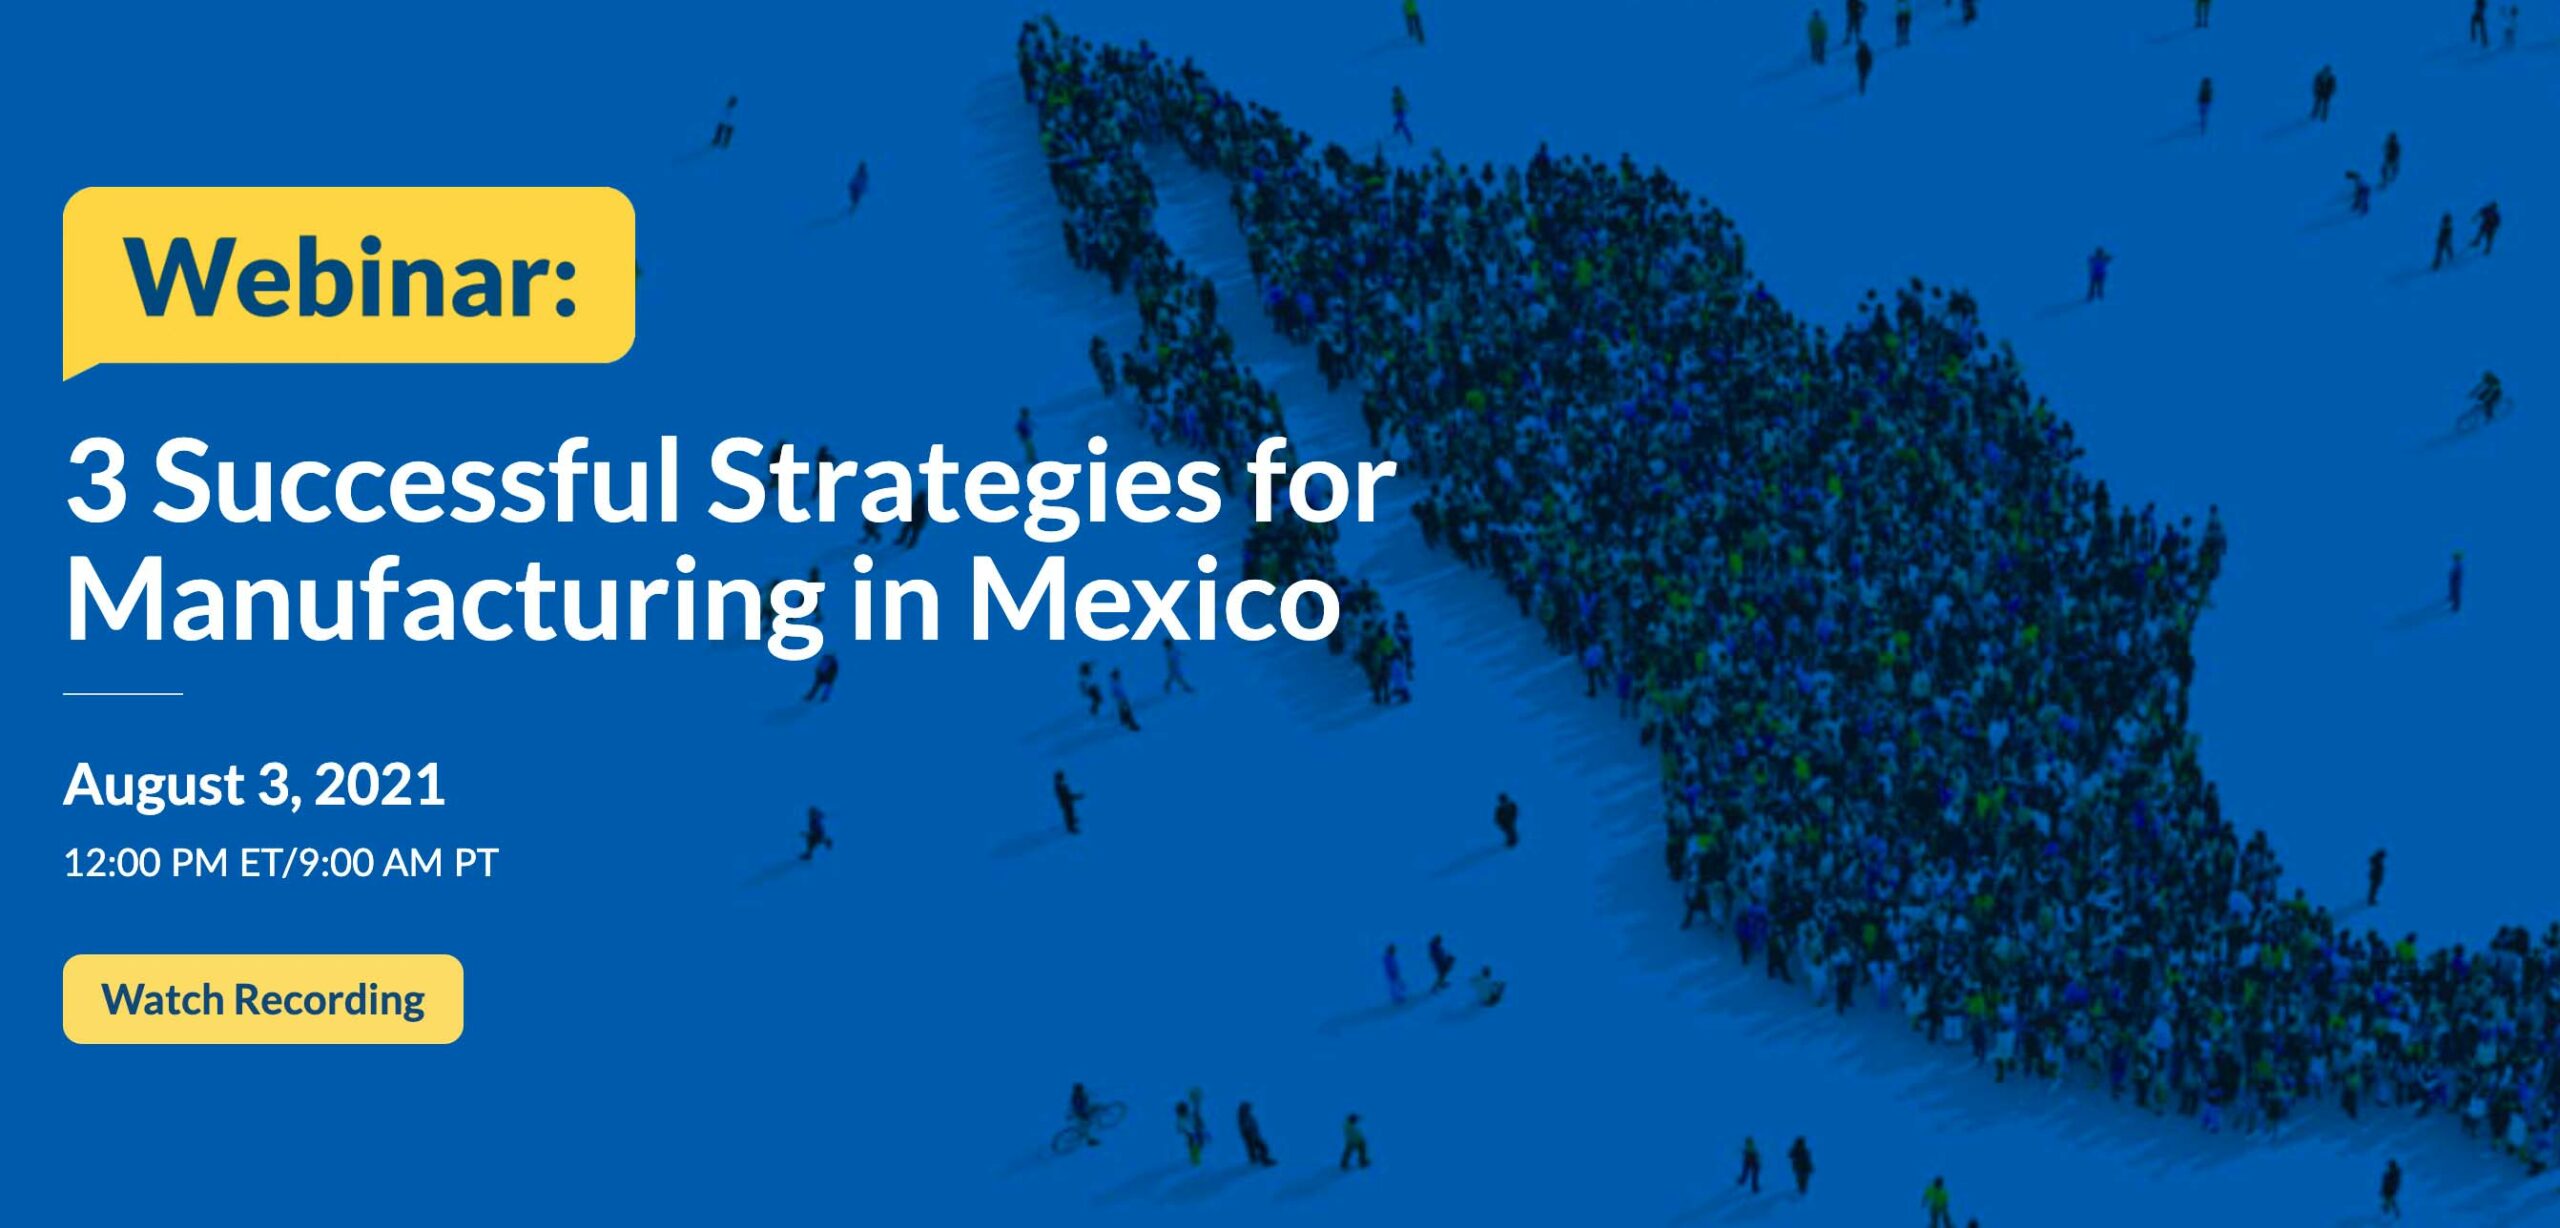 3 Successful Strategies for Manufacturing in Mexico